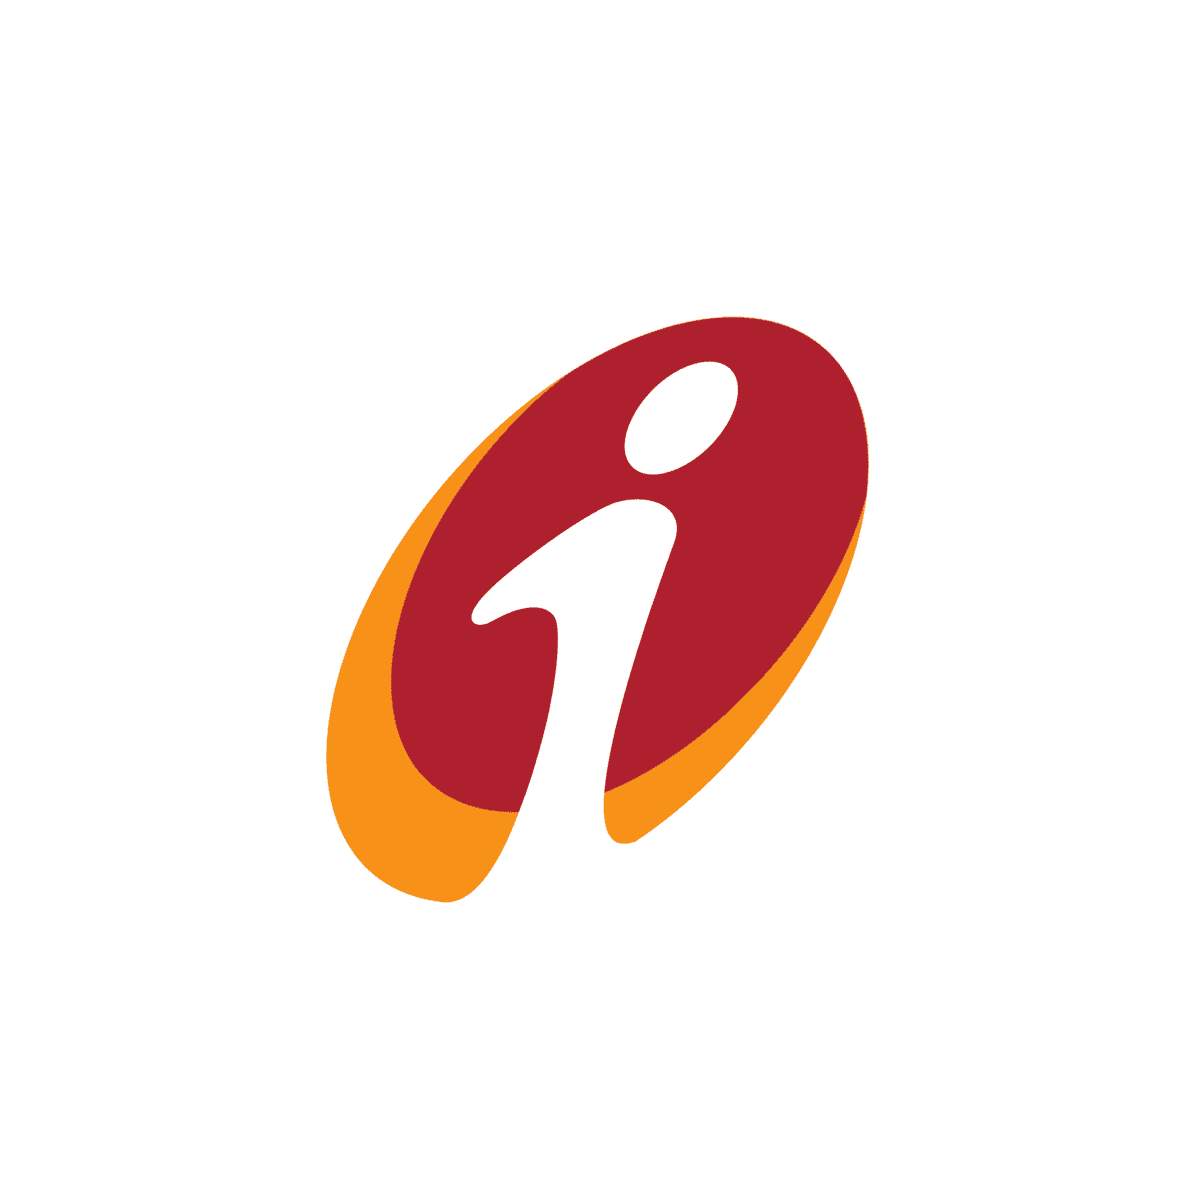 Icici Bank Offer Projects :: Photos, videos, logos, illustrations and  branding :: Behance